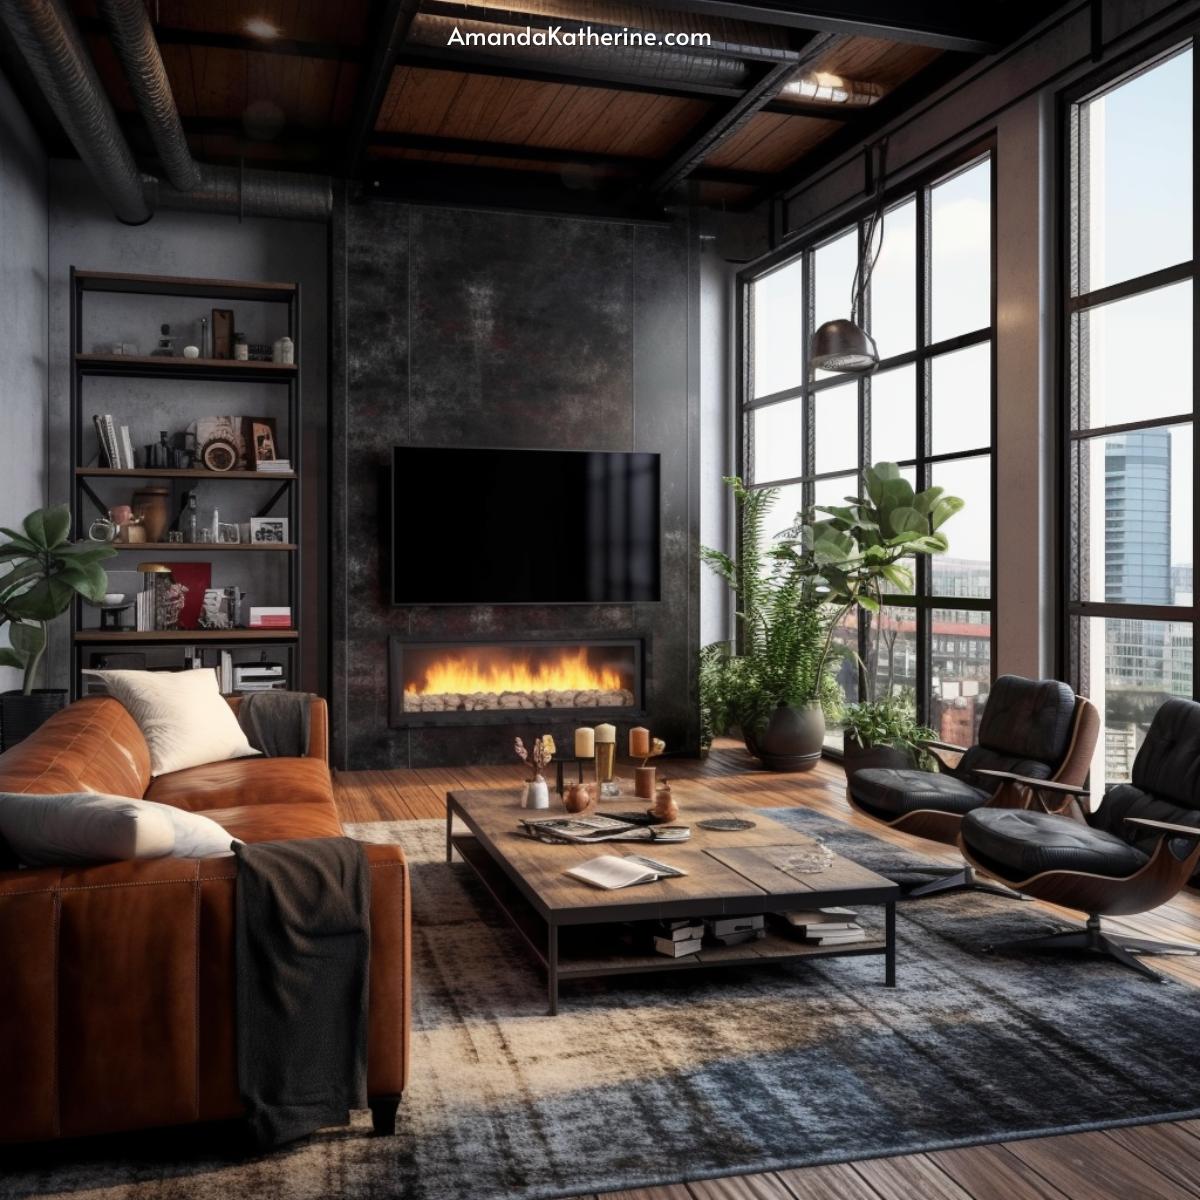 31 Stunning Fireplace Wall Ideas with a TV for Your Living Room | industrial interior